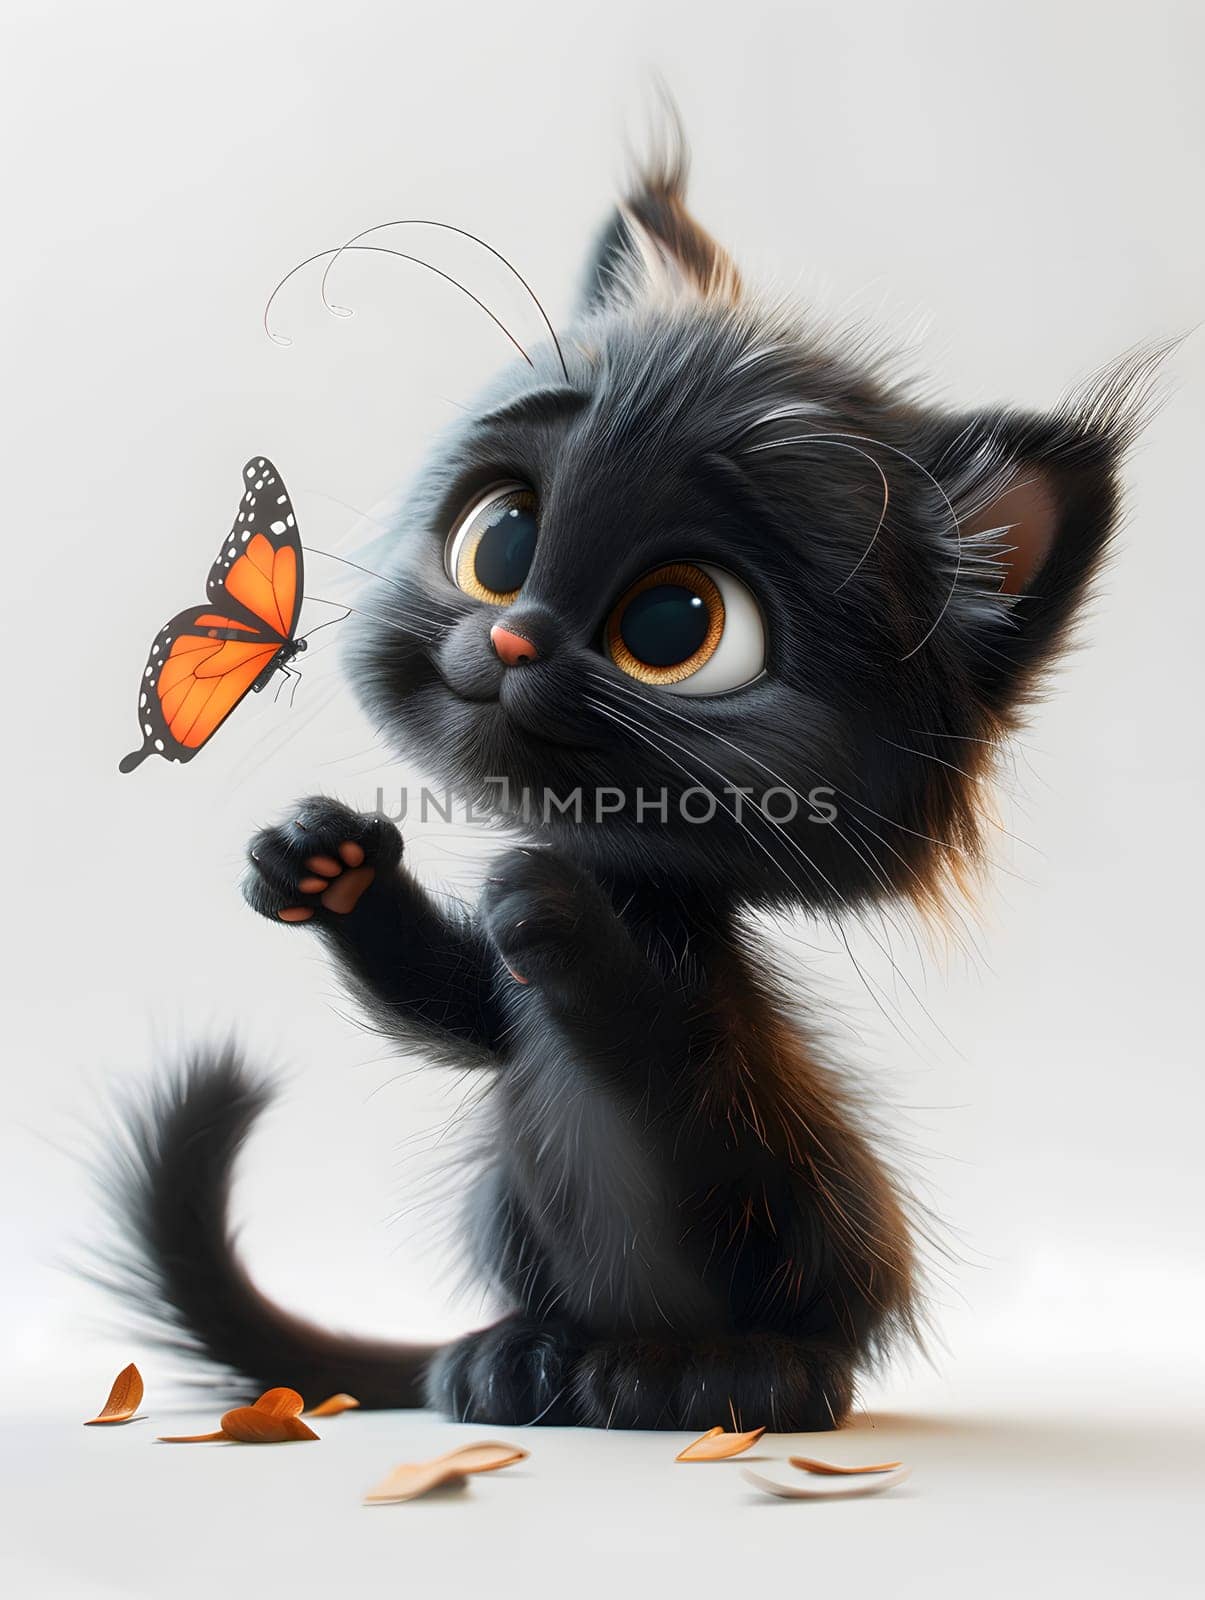 A Felidae cat playing with a Pollinator butterfly on its paw by Nadtochiy